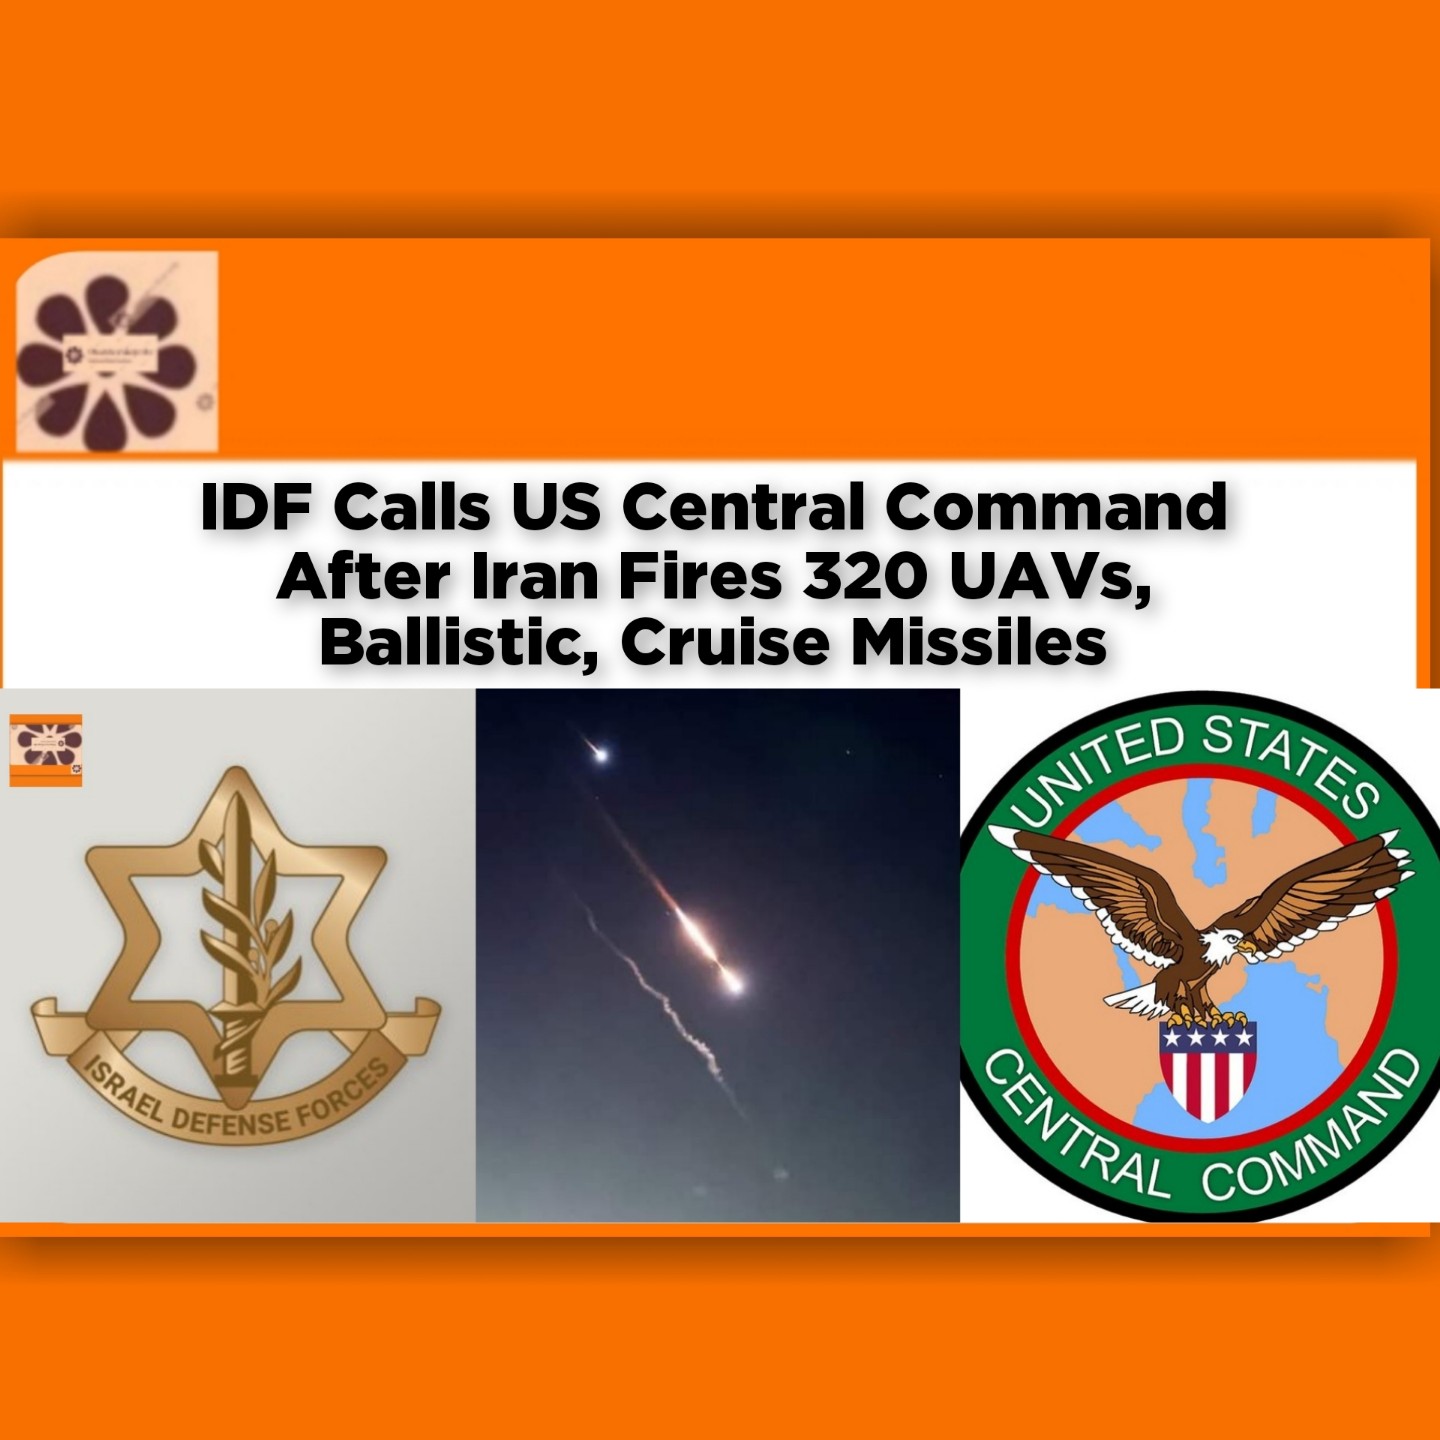 IDF Calls US Central Command After Iran Fires 320 UAVs, Ballistic, Cruise Missiles ~ OsazuwaAkonedo #Afghanistan